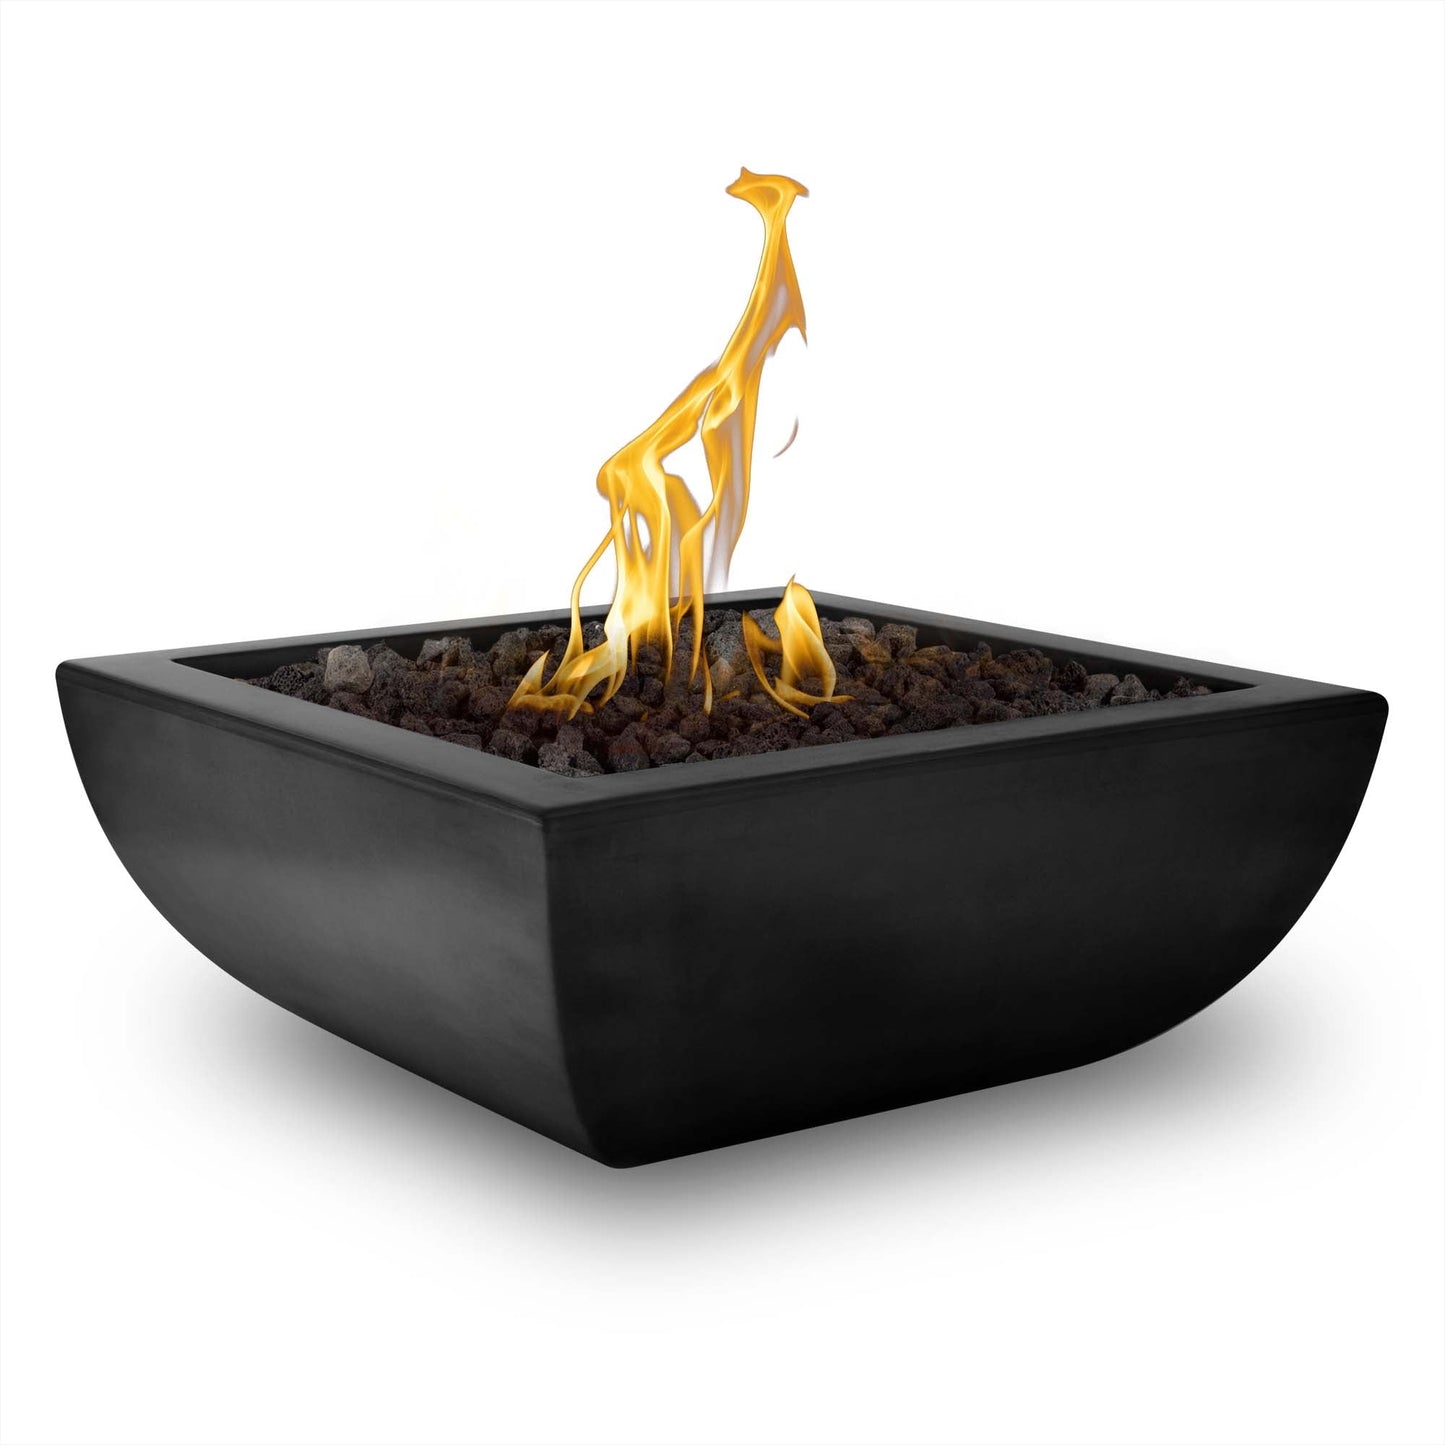 The Outdoor Plus Square Avalon 30" Rustic Moss Stone GFRC Concrete Liquid Propane Fire Bowl with Match Lit with Flame Sense Ignition